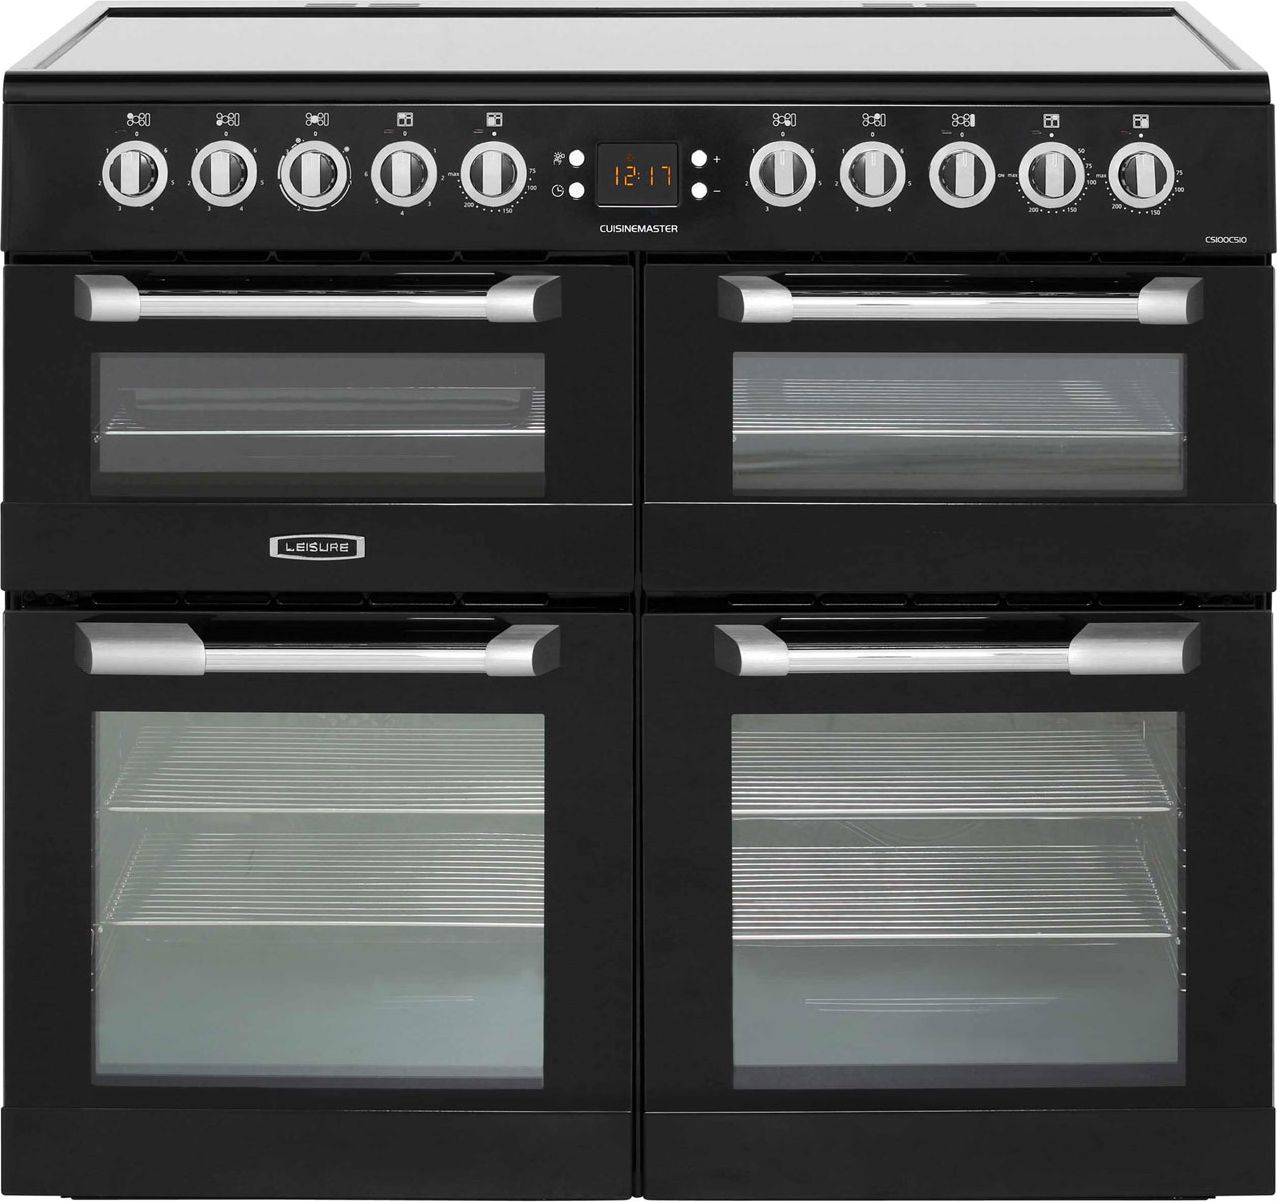 Leisure Cuisinemaster CS100C510K 100cm Electric Range Cooker with Ceramic Hob - Black - A/A/A Rated, Black